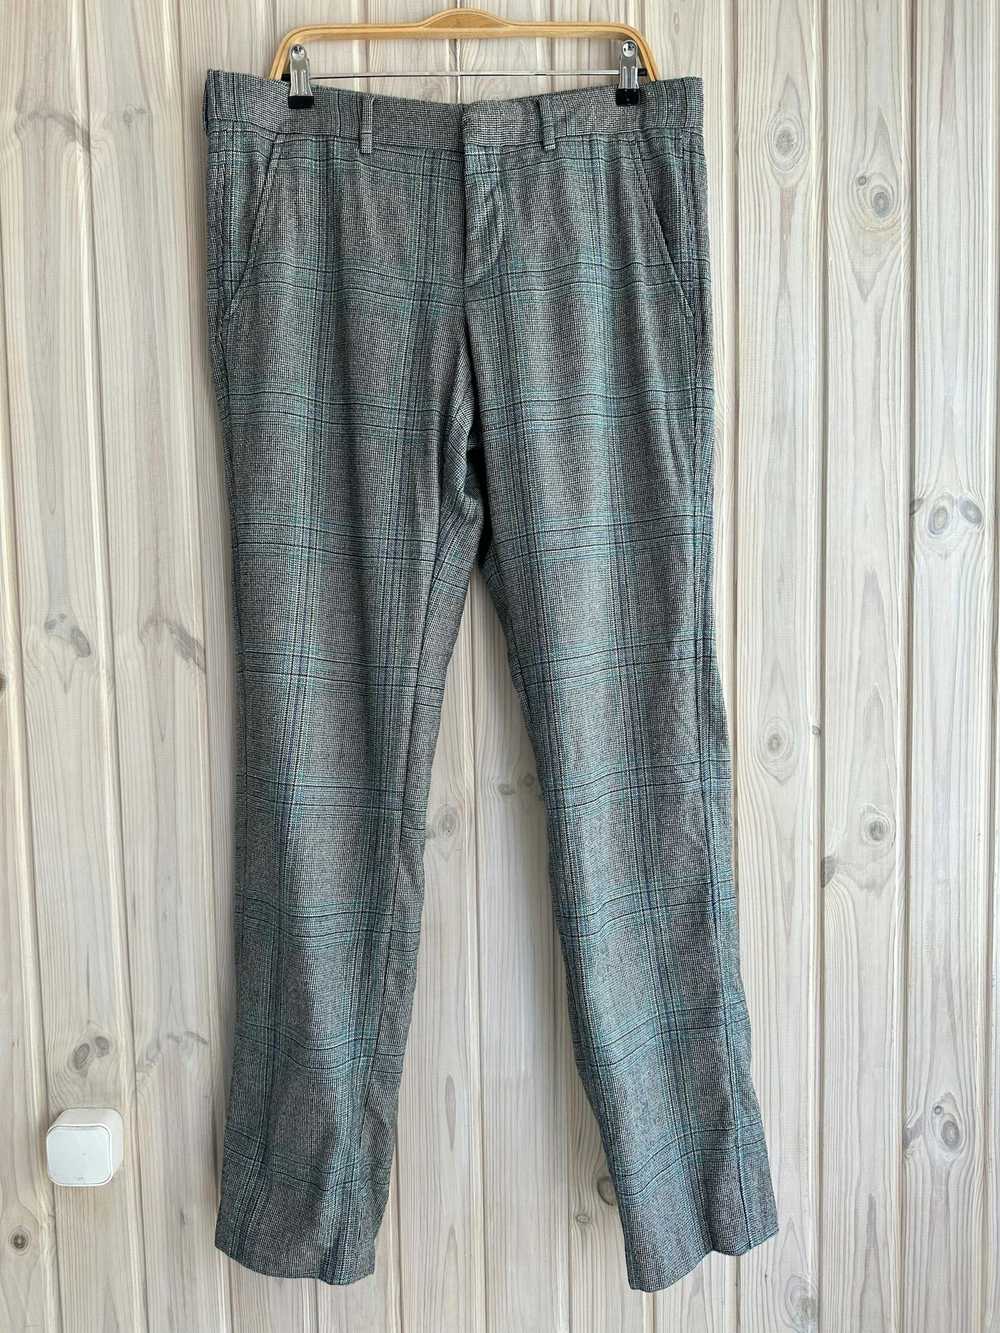 Gucci GUCCI Wool Mohair Plaid Check Trousers - image 1